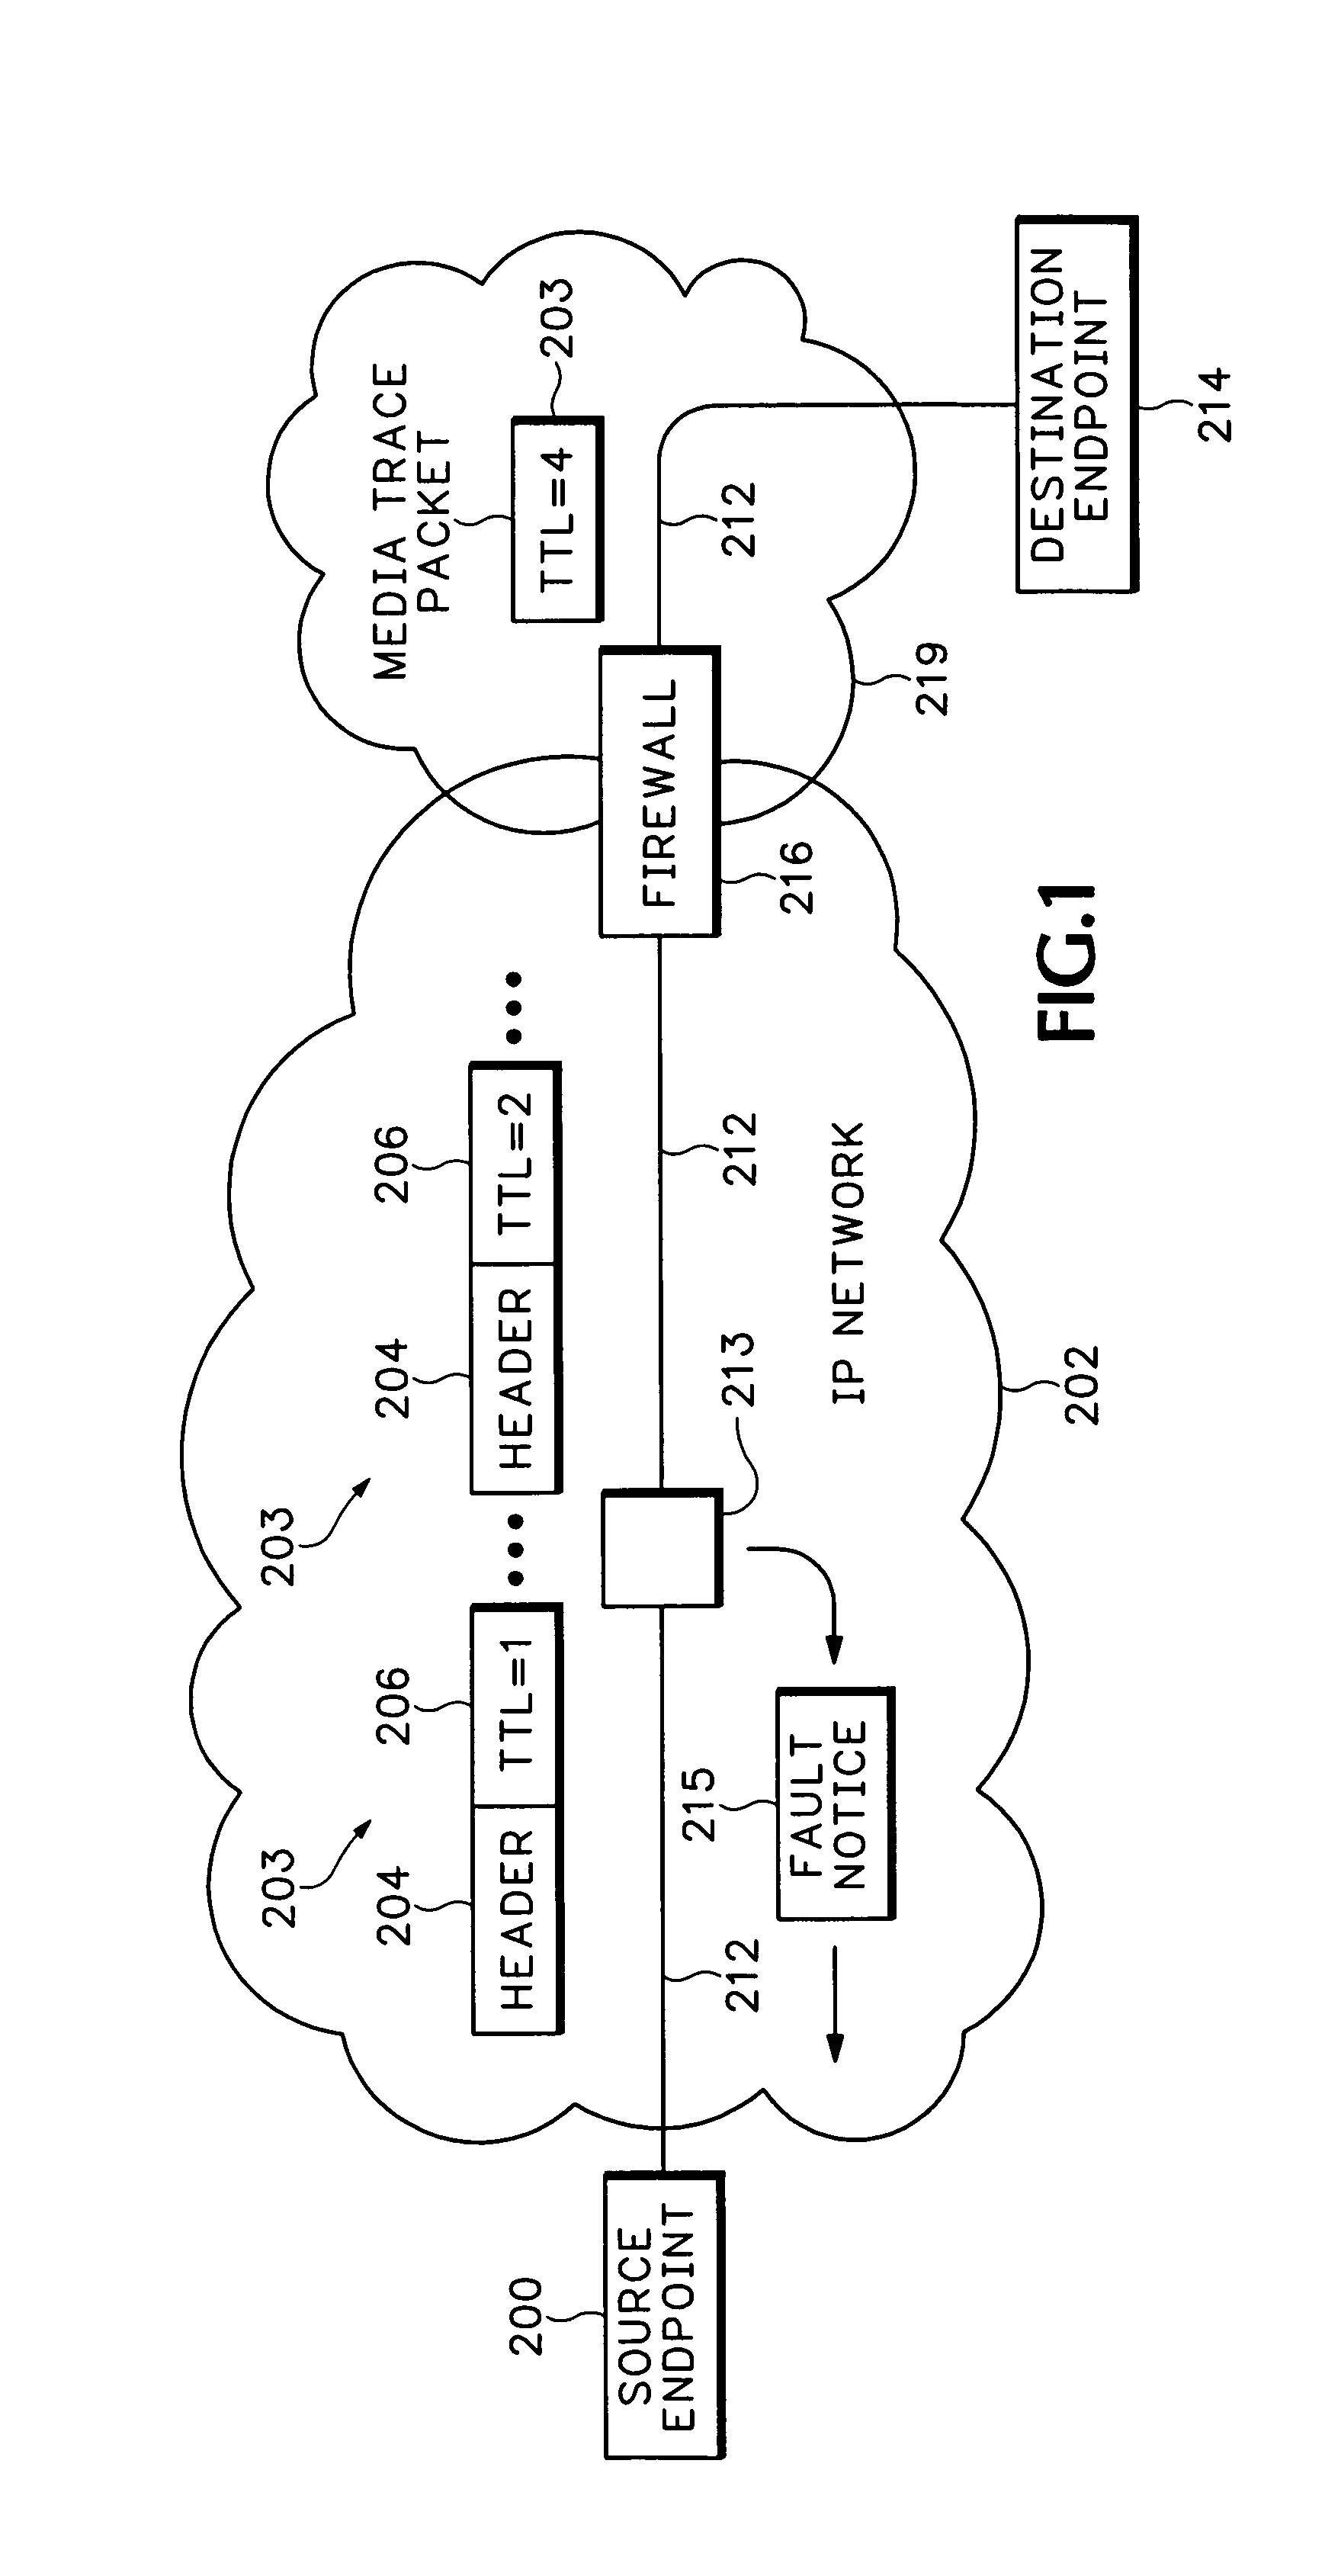 Method and apparatus for analyzing a media path for an internet protocol (IP) media session